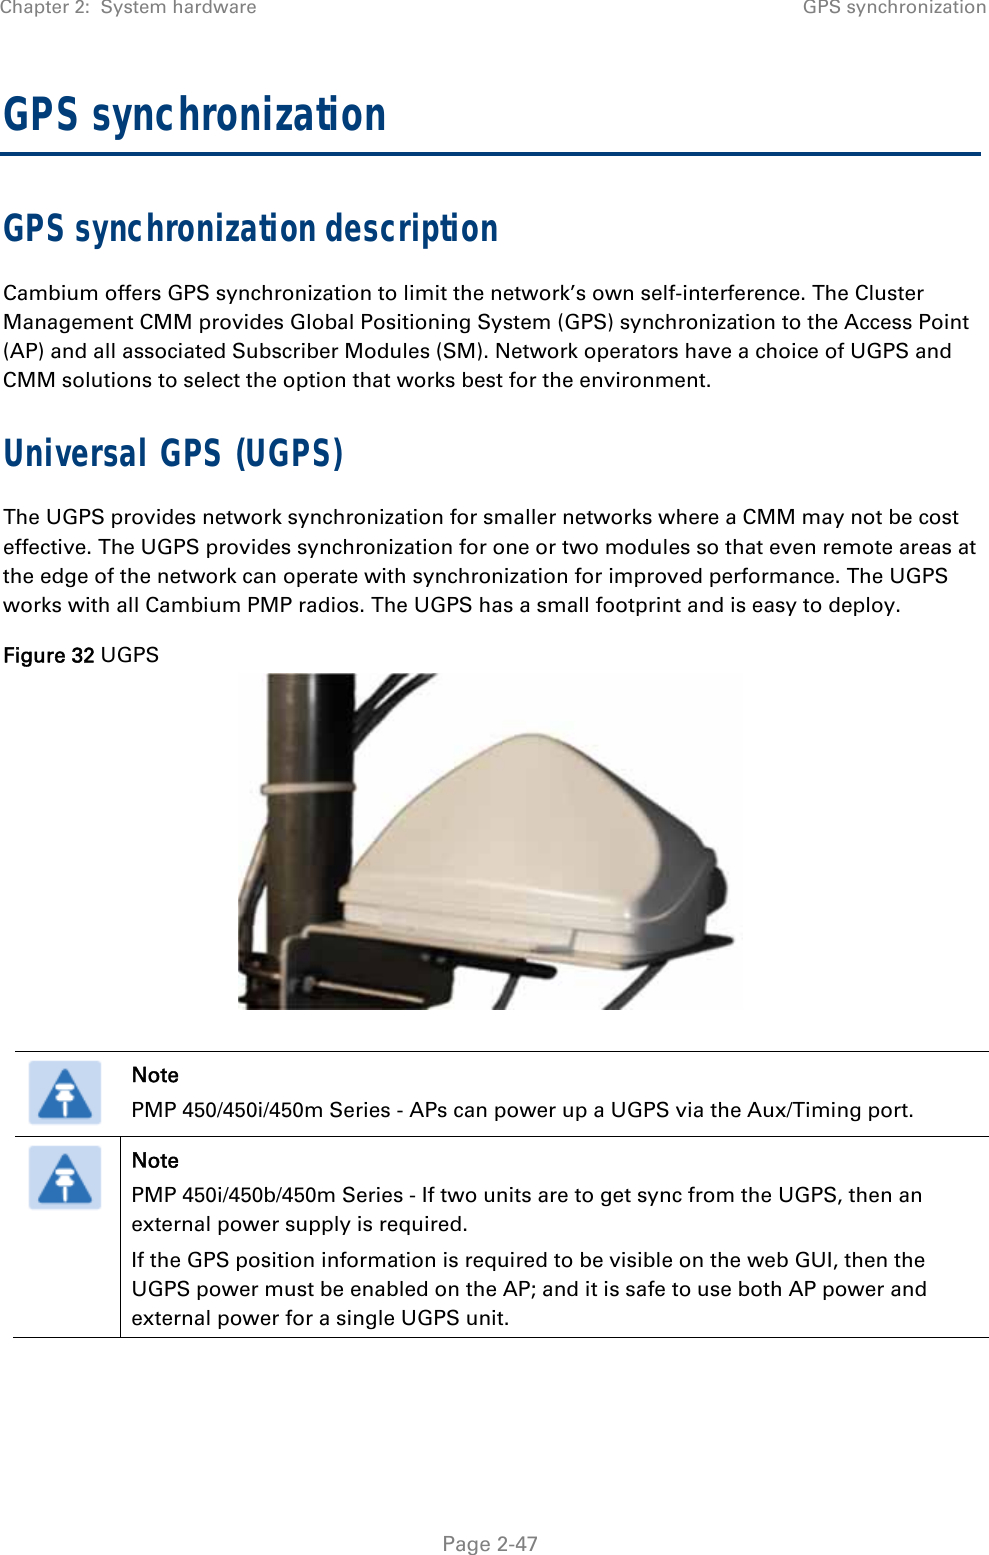 Chapter 2:  System hardware  GPS synchronization   Page 2-47 GPS synchronization GPS synchronization description Cambium offers GPS synchronization to limit the network’s own self-interference. The Cluster Management CMM provides Global Positioning System (GPS) synchronization to the Access Point (AP) and all associated Subscriber Modules (SM). Network operators have a choice of UGPS and CMM solutions to select the option that works best for the environment. Universal GPS (UGPS) The UGPS provides network synchronization for smaller networks where a CMM may not be cost effective. The UGPS provides synchronization for one or two modules so that even remote areas at the edge of the network can operate with synchronization for improved performance. The UGPS works with all Cambium PMP radios. The UGPS has a small footprint and is easy to deploy. Figure 32 UGPS    Note PMP 450/450i/450m Series - APs can power up a UGPS via the Aux/Timing port.  Note PMP 450i/450b/450m Series - If two units are to get sync from the UGPS, then an external power supply is required.  If the GPS position information is required to be visible on the web GUI, then the UGPS power must be enabled on the AP; and it is safe to use both AP power and external power for a single UGPS unit.    